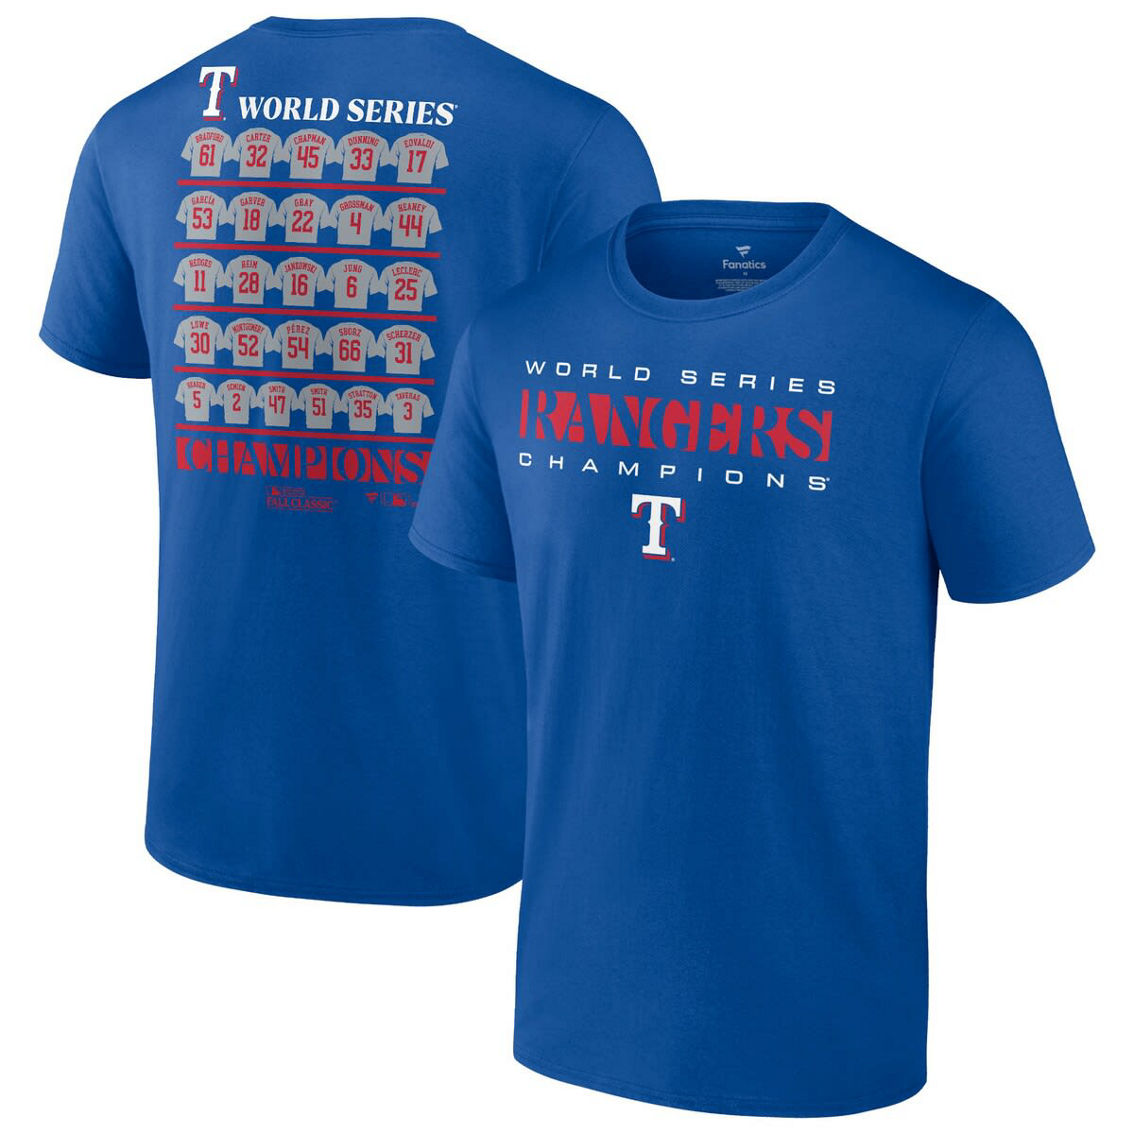 Men's Royal Texas Rangers 2023 World Series Champions Jersey Roster T-Shirt - Image 1 of 4